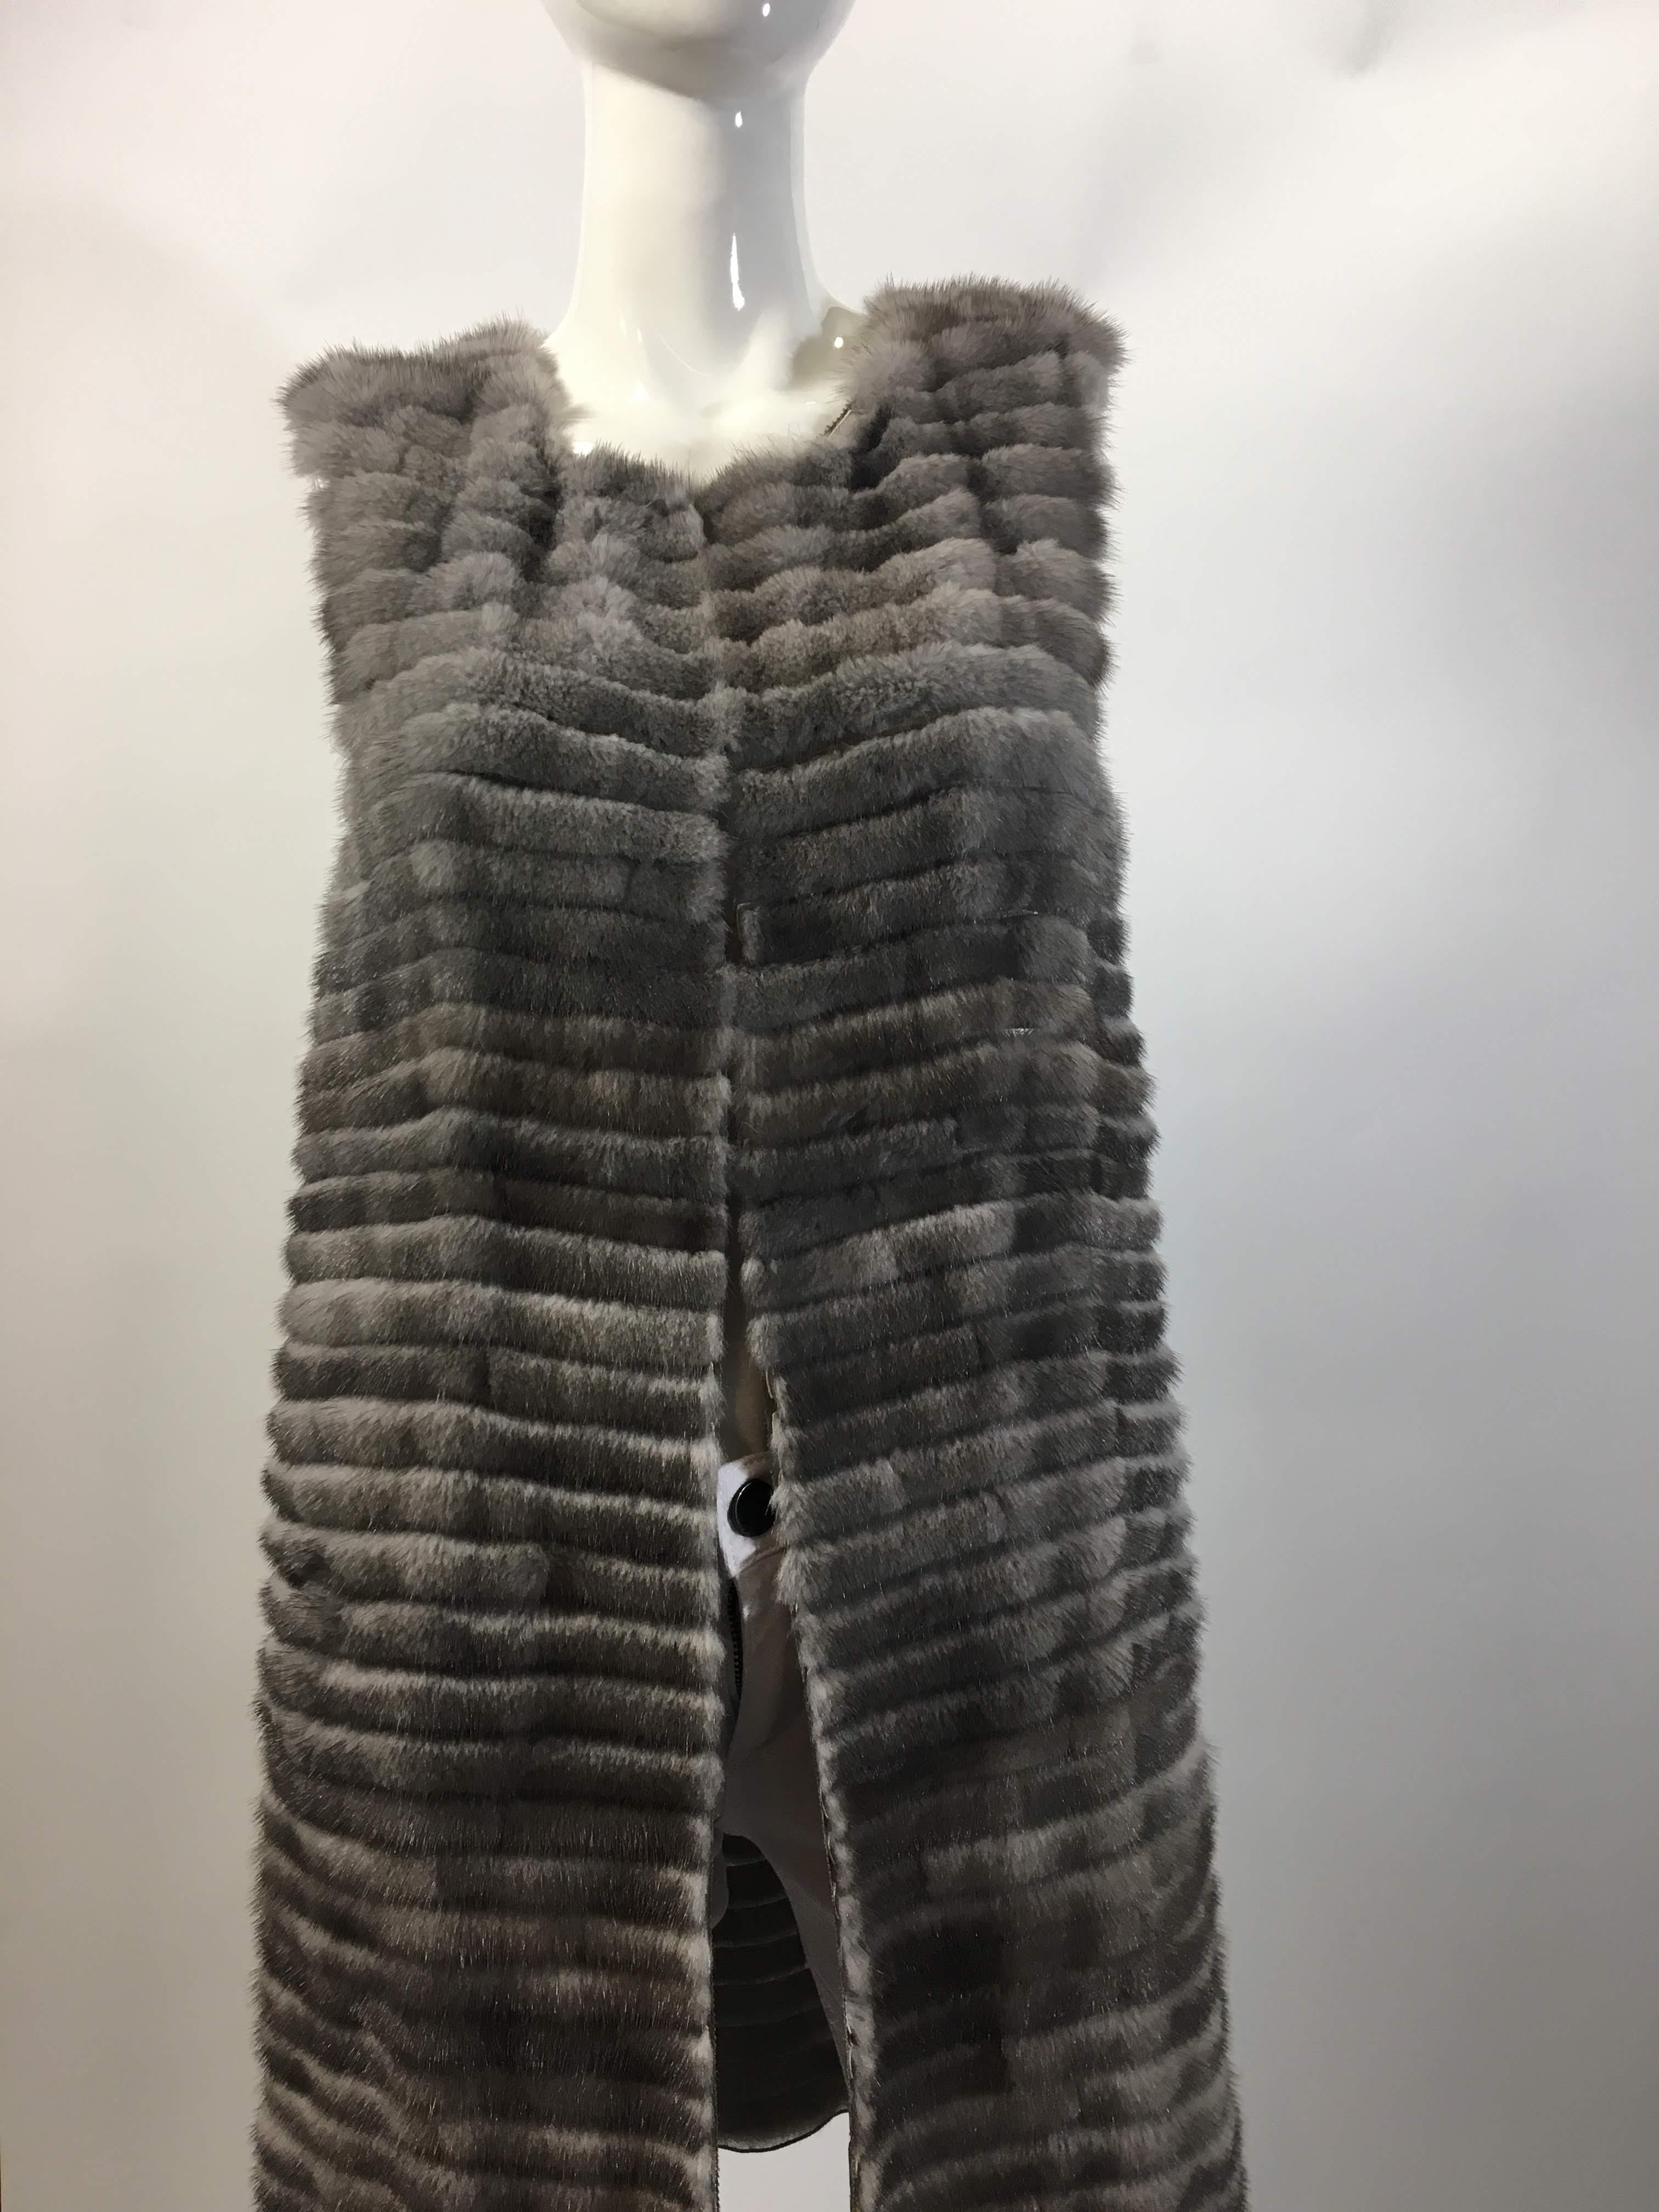 Vera Wang Collection White Open Front Vest
Tiered -Style Knee Length Coat
Gray 100% Mink
Made in the USA
Sheer Silk Lining
Size 4